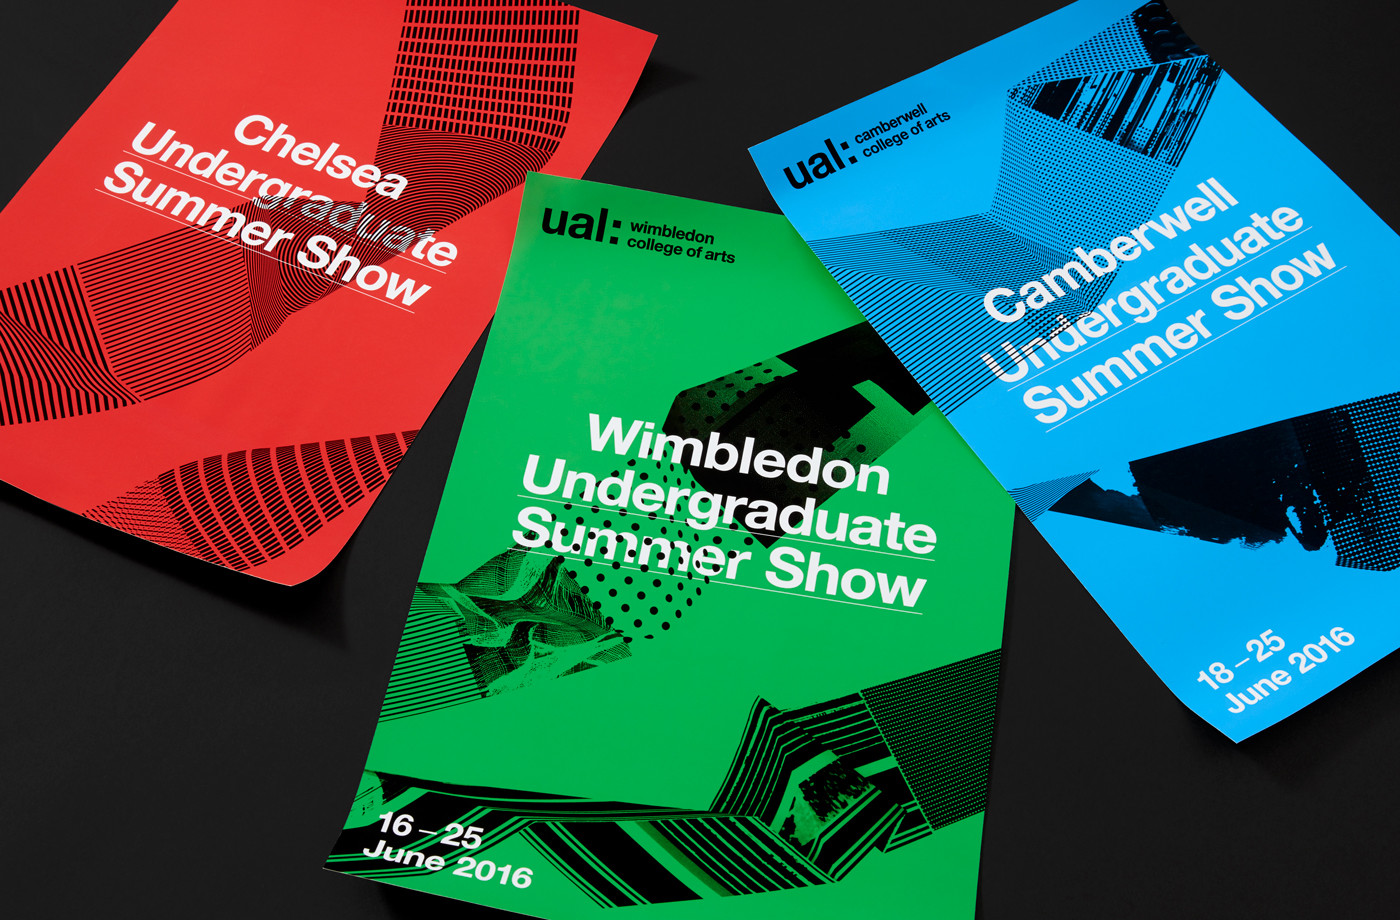 Poster designed by Spy for the University of the Arts London 2016–17 campaign